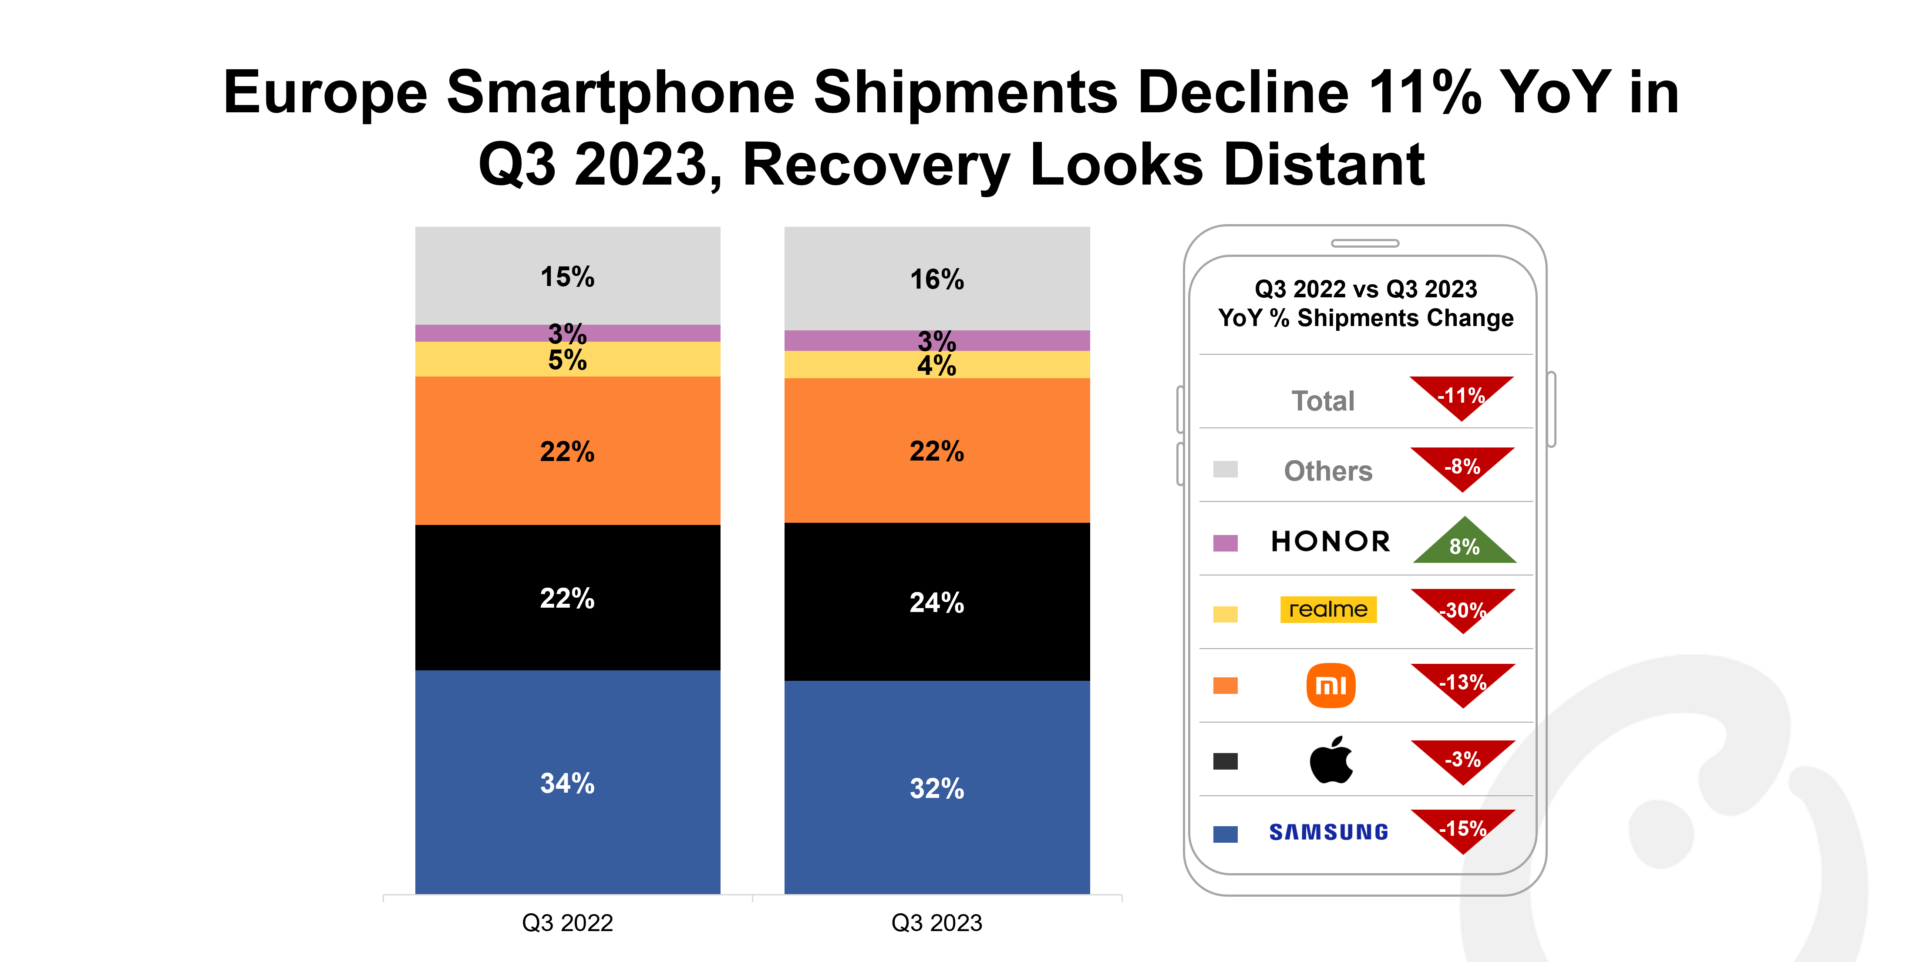 Europe Smartphone Shipments Decline 11% YoY in Q3 2023, Recovery Looks Distant